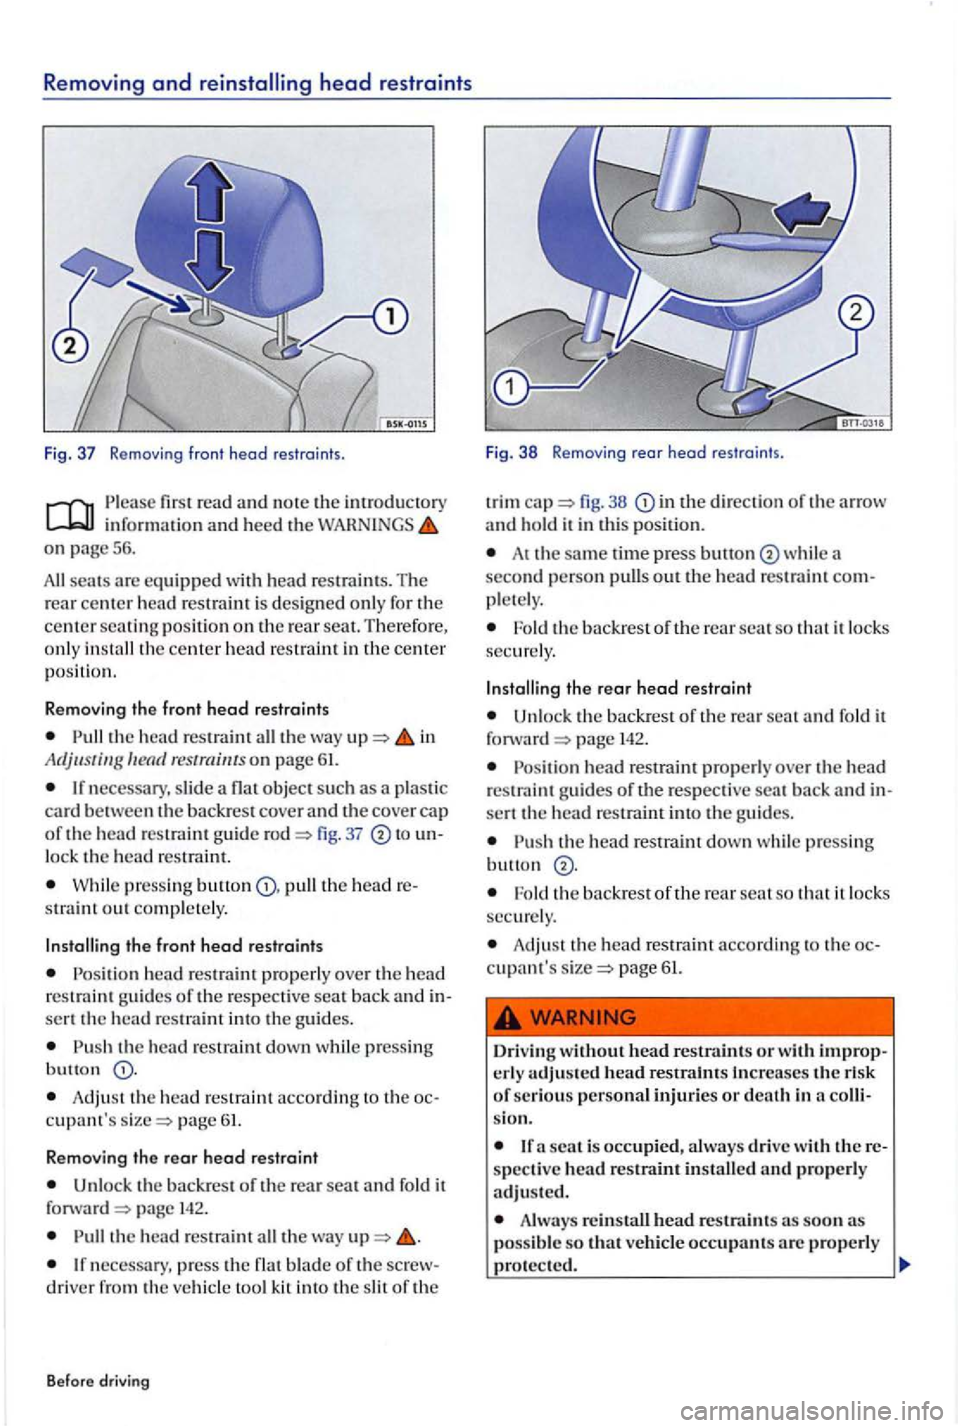 VOLKSWAGEN GOLF PLUS 2004  Owners Manual Removing and head restraints 
Fig.  37 Removi ng fro nt  head restr aints. 
read and note the introduc tory informat ion and heed the on page 56 . 
scats arc equipped with  head restrain ts . The rear